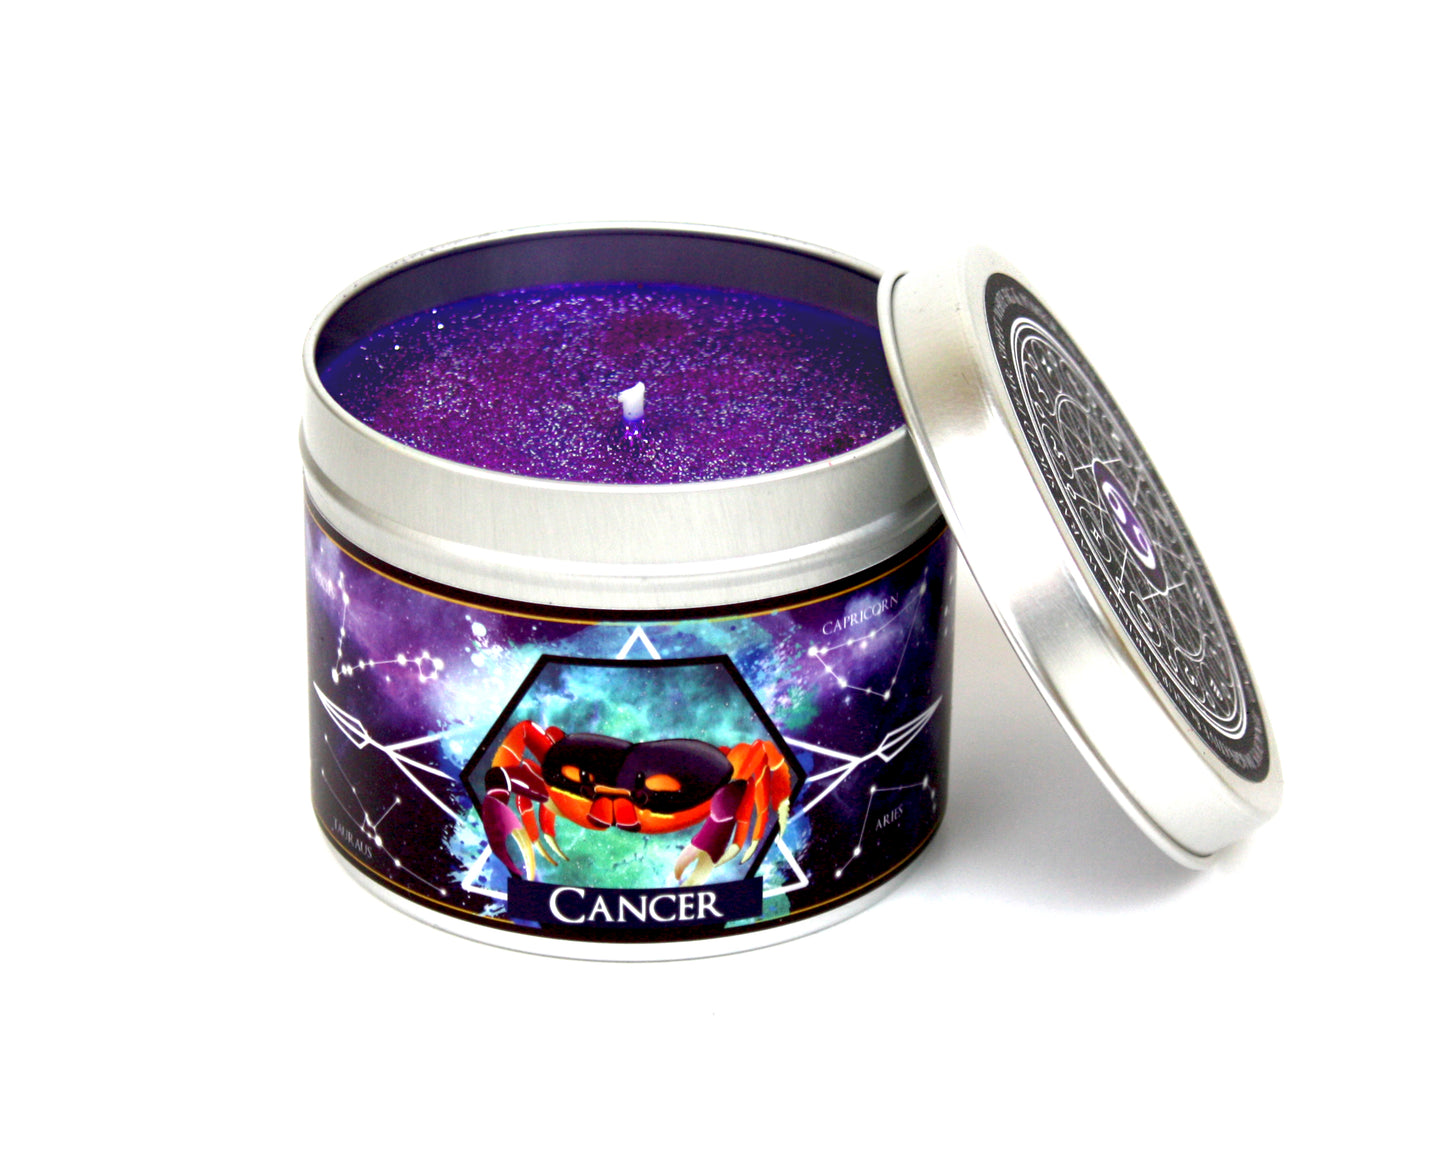 Cancer Zodiac Star Sign Scented Candle with purple wax | Happy Piranha